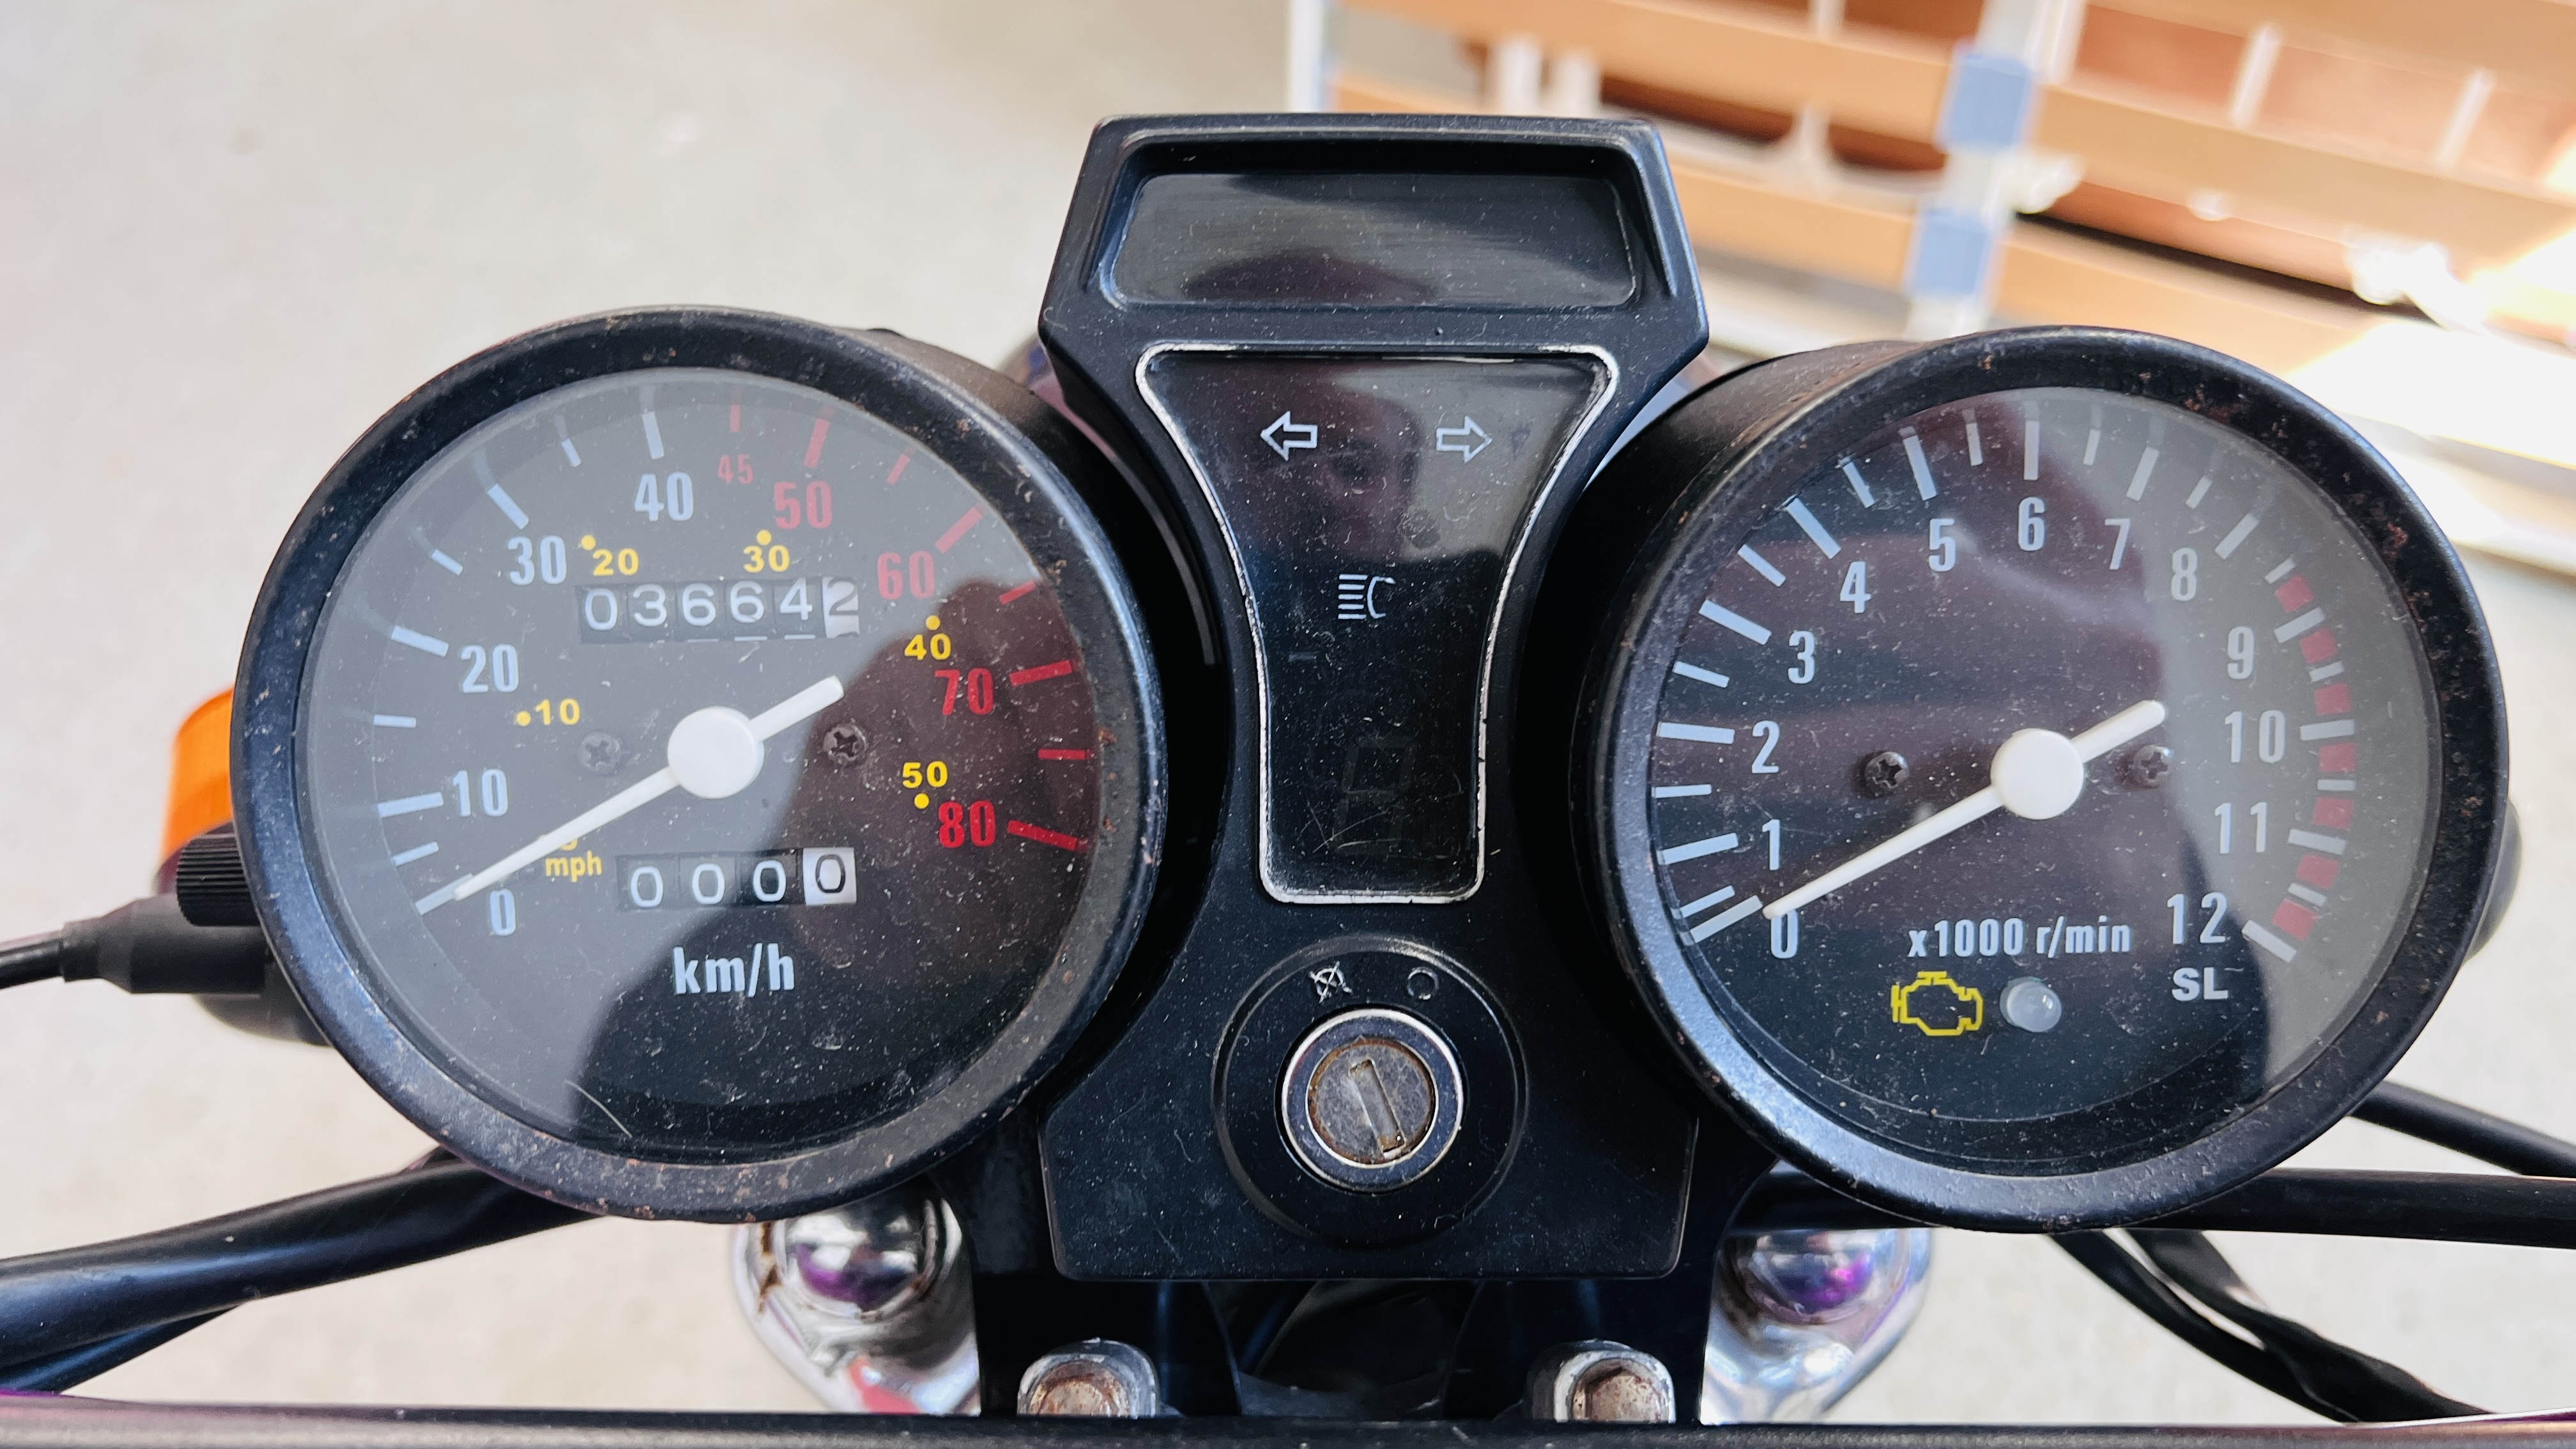 CHAMP 48CC MOTOR CYCLE. VRM - KX69 CHD. FIRST REGISTERED: 01/10/2019. MOT EXPIRED: 30/09/2022. - Image 22 of 22